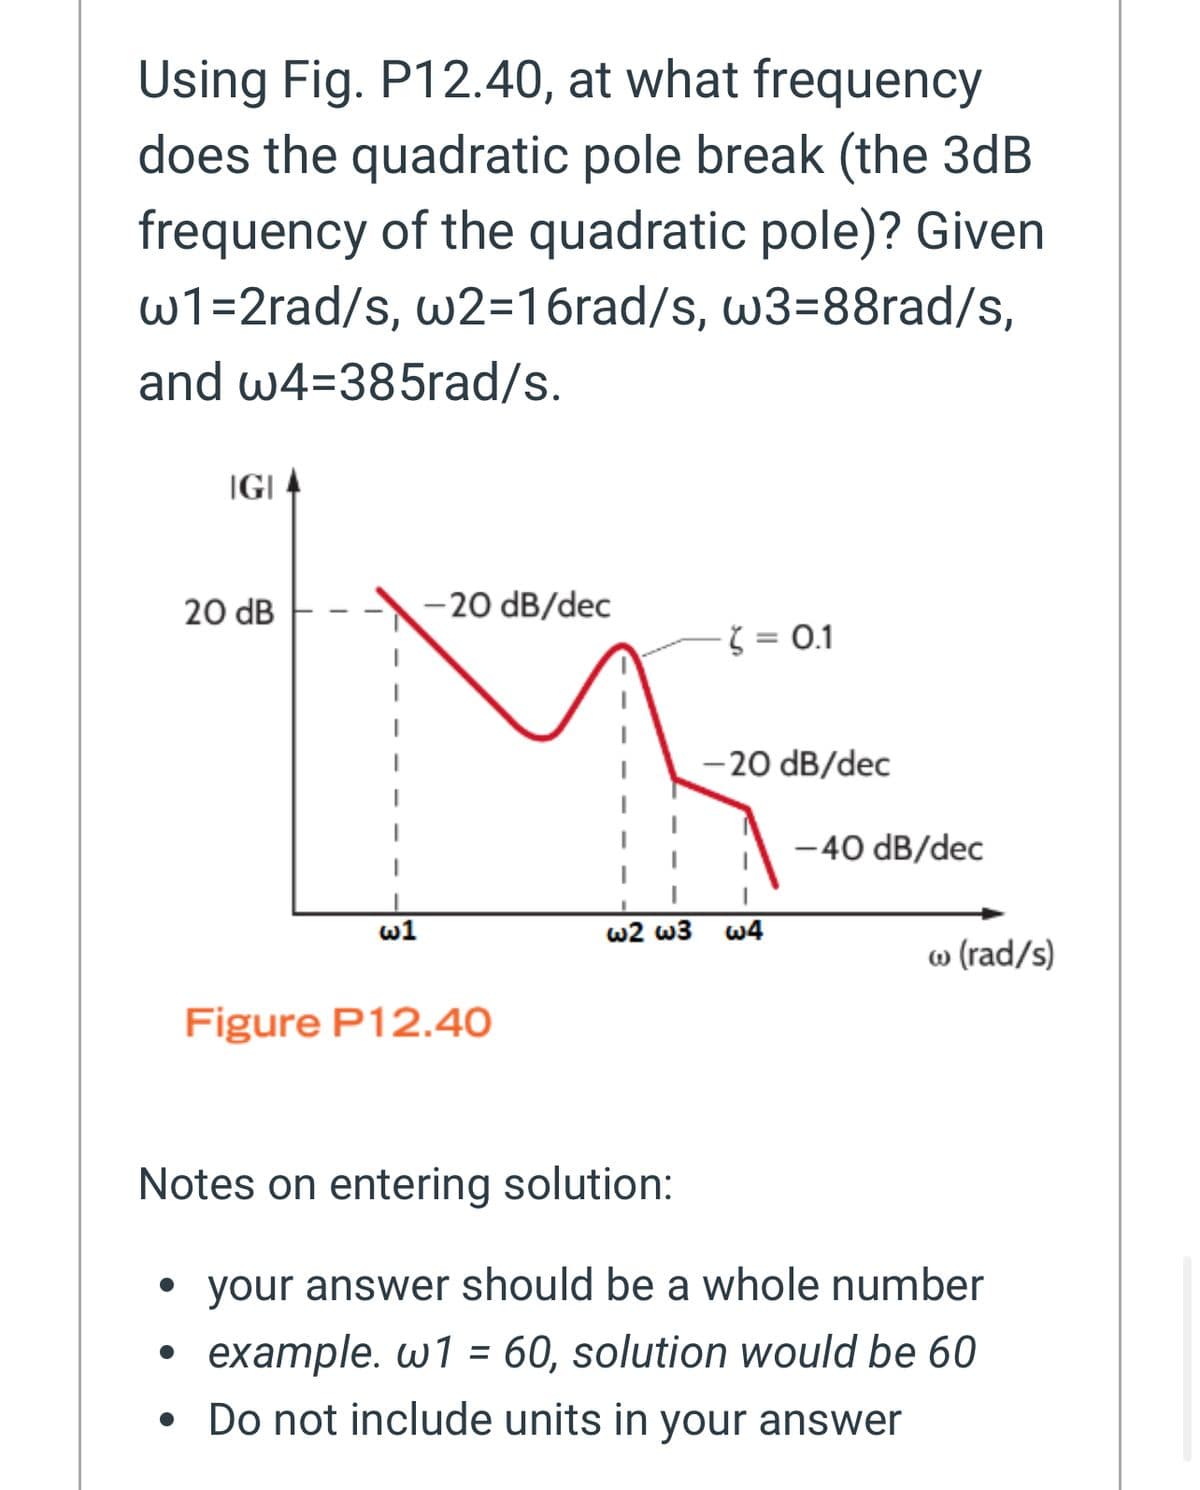 Using Fig. P12.40, at what frequency
does the quadratic pole break (the 3dB
frequency of the quadratic pole)? Given
w1=2rad/s, w2=16rad/s, w3=88rad/s,
and w4=385rad/s.
IGI
20 dB
-20 dB/dec
= 0.1
-20 dB/dec
-40 dB/dec
w1
W2 W3 W4
w (rad/s)
Figure P12.40
Notes on entering solution:
• your answer should be a whole number
.
example. w1 = 60, solution would be 60
.
Do not include units in your answer